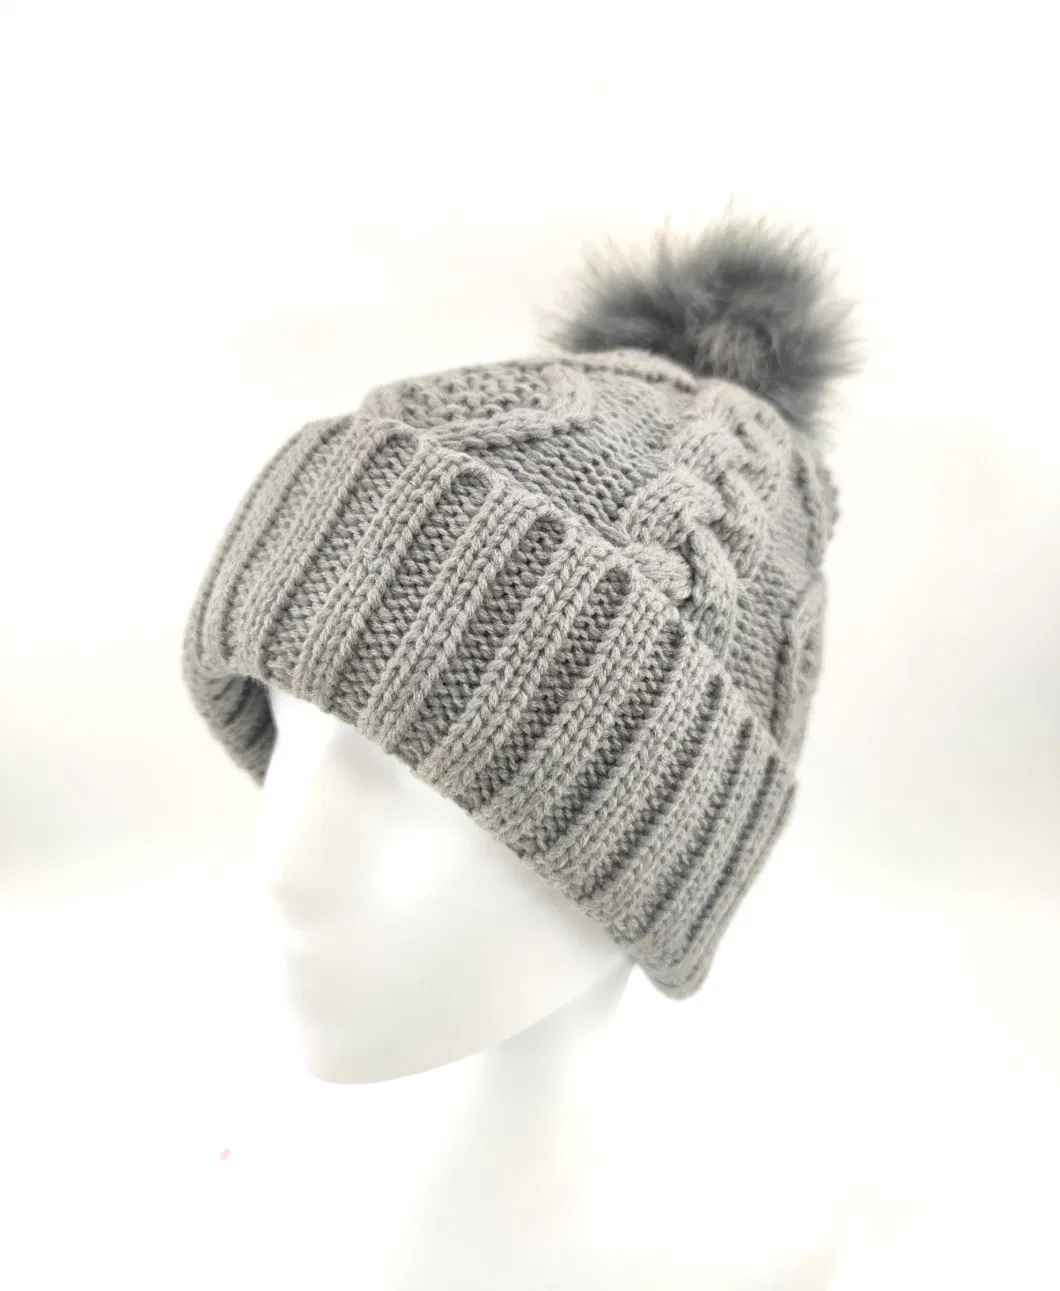 Acrylic Yarn Jacquard Knitted Hat with Cuff and Fake Fur Pompon, Half Fleece Lining.